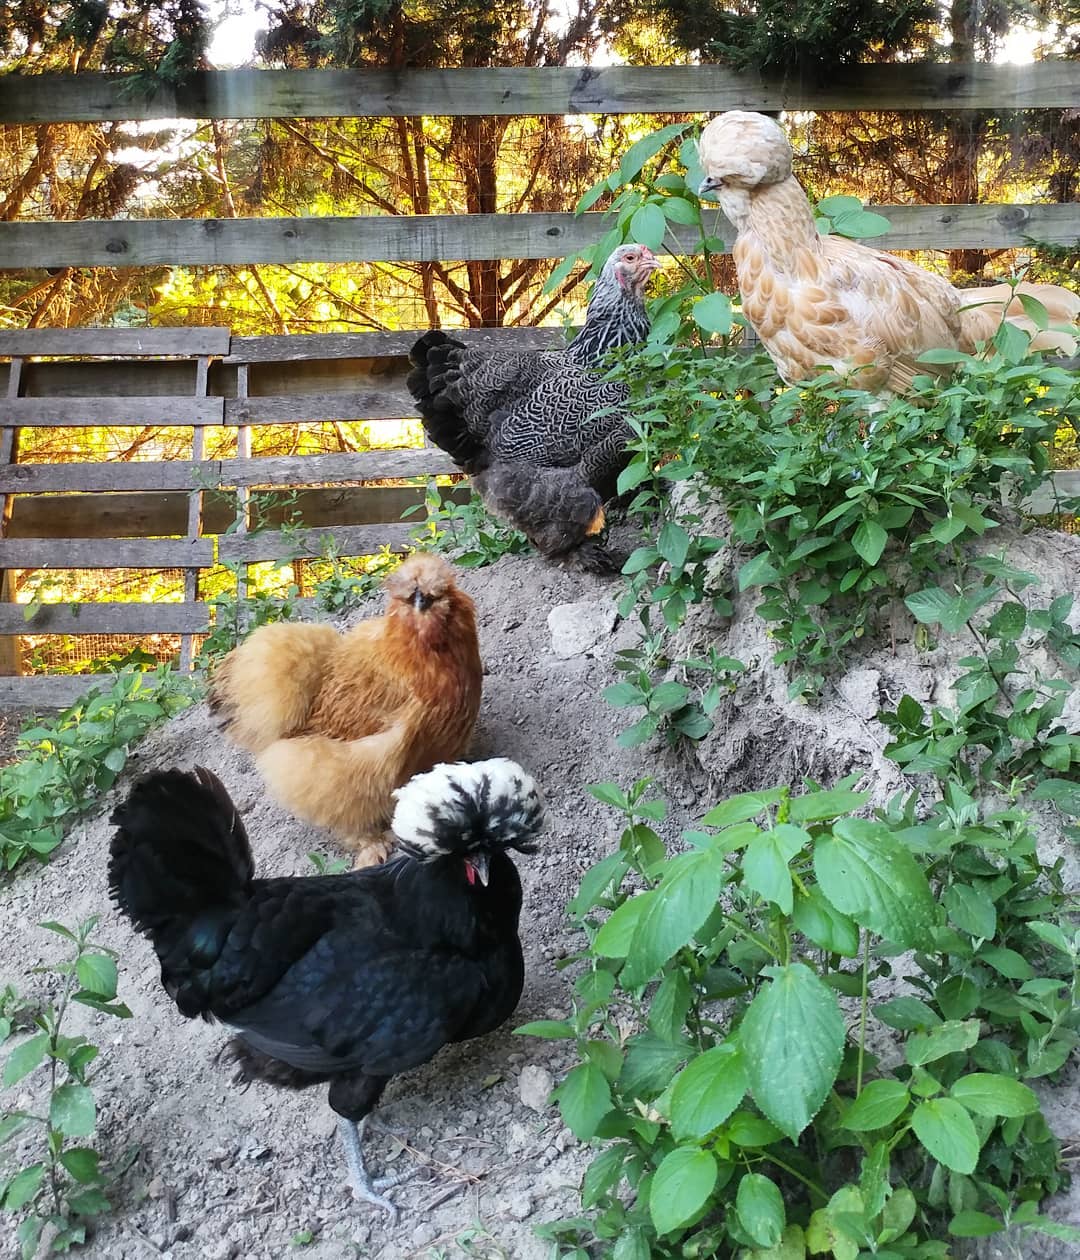 Girl gang. These four live together in the rooster free coop and choose to spend their free ranging time together too. I love all my chickens equally (but these are my favorites)! Top to bottom: Becky with the Good Hair, Violet Zindars, Donna Martin and Kahlo.